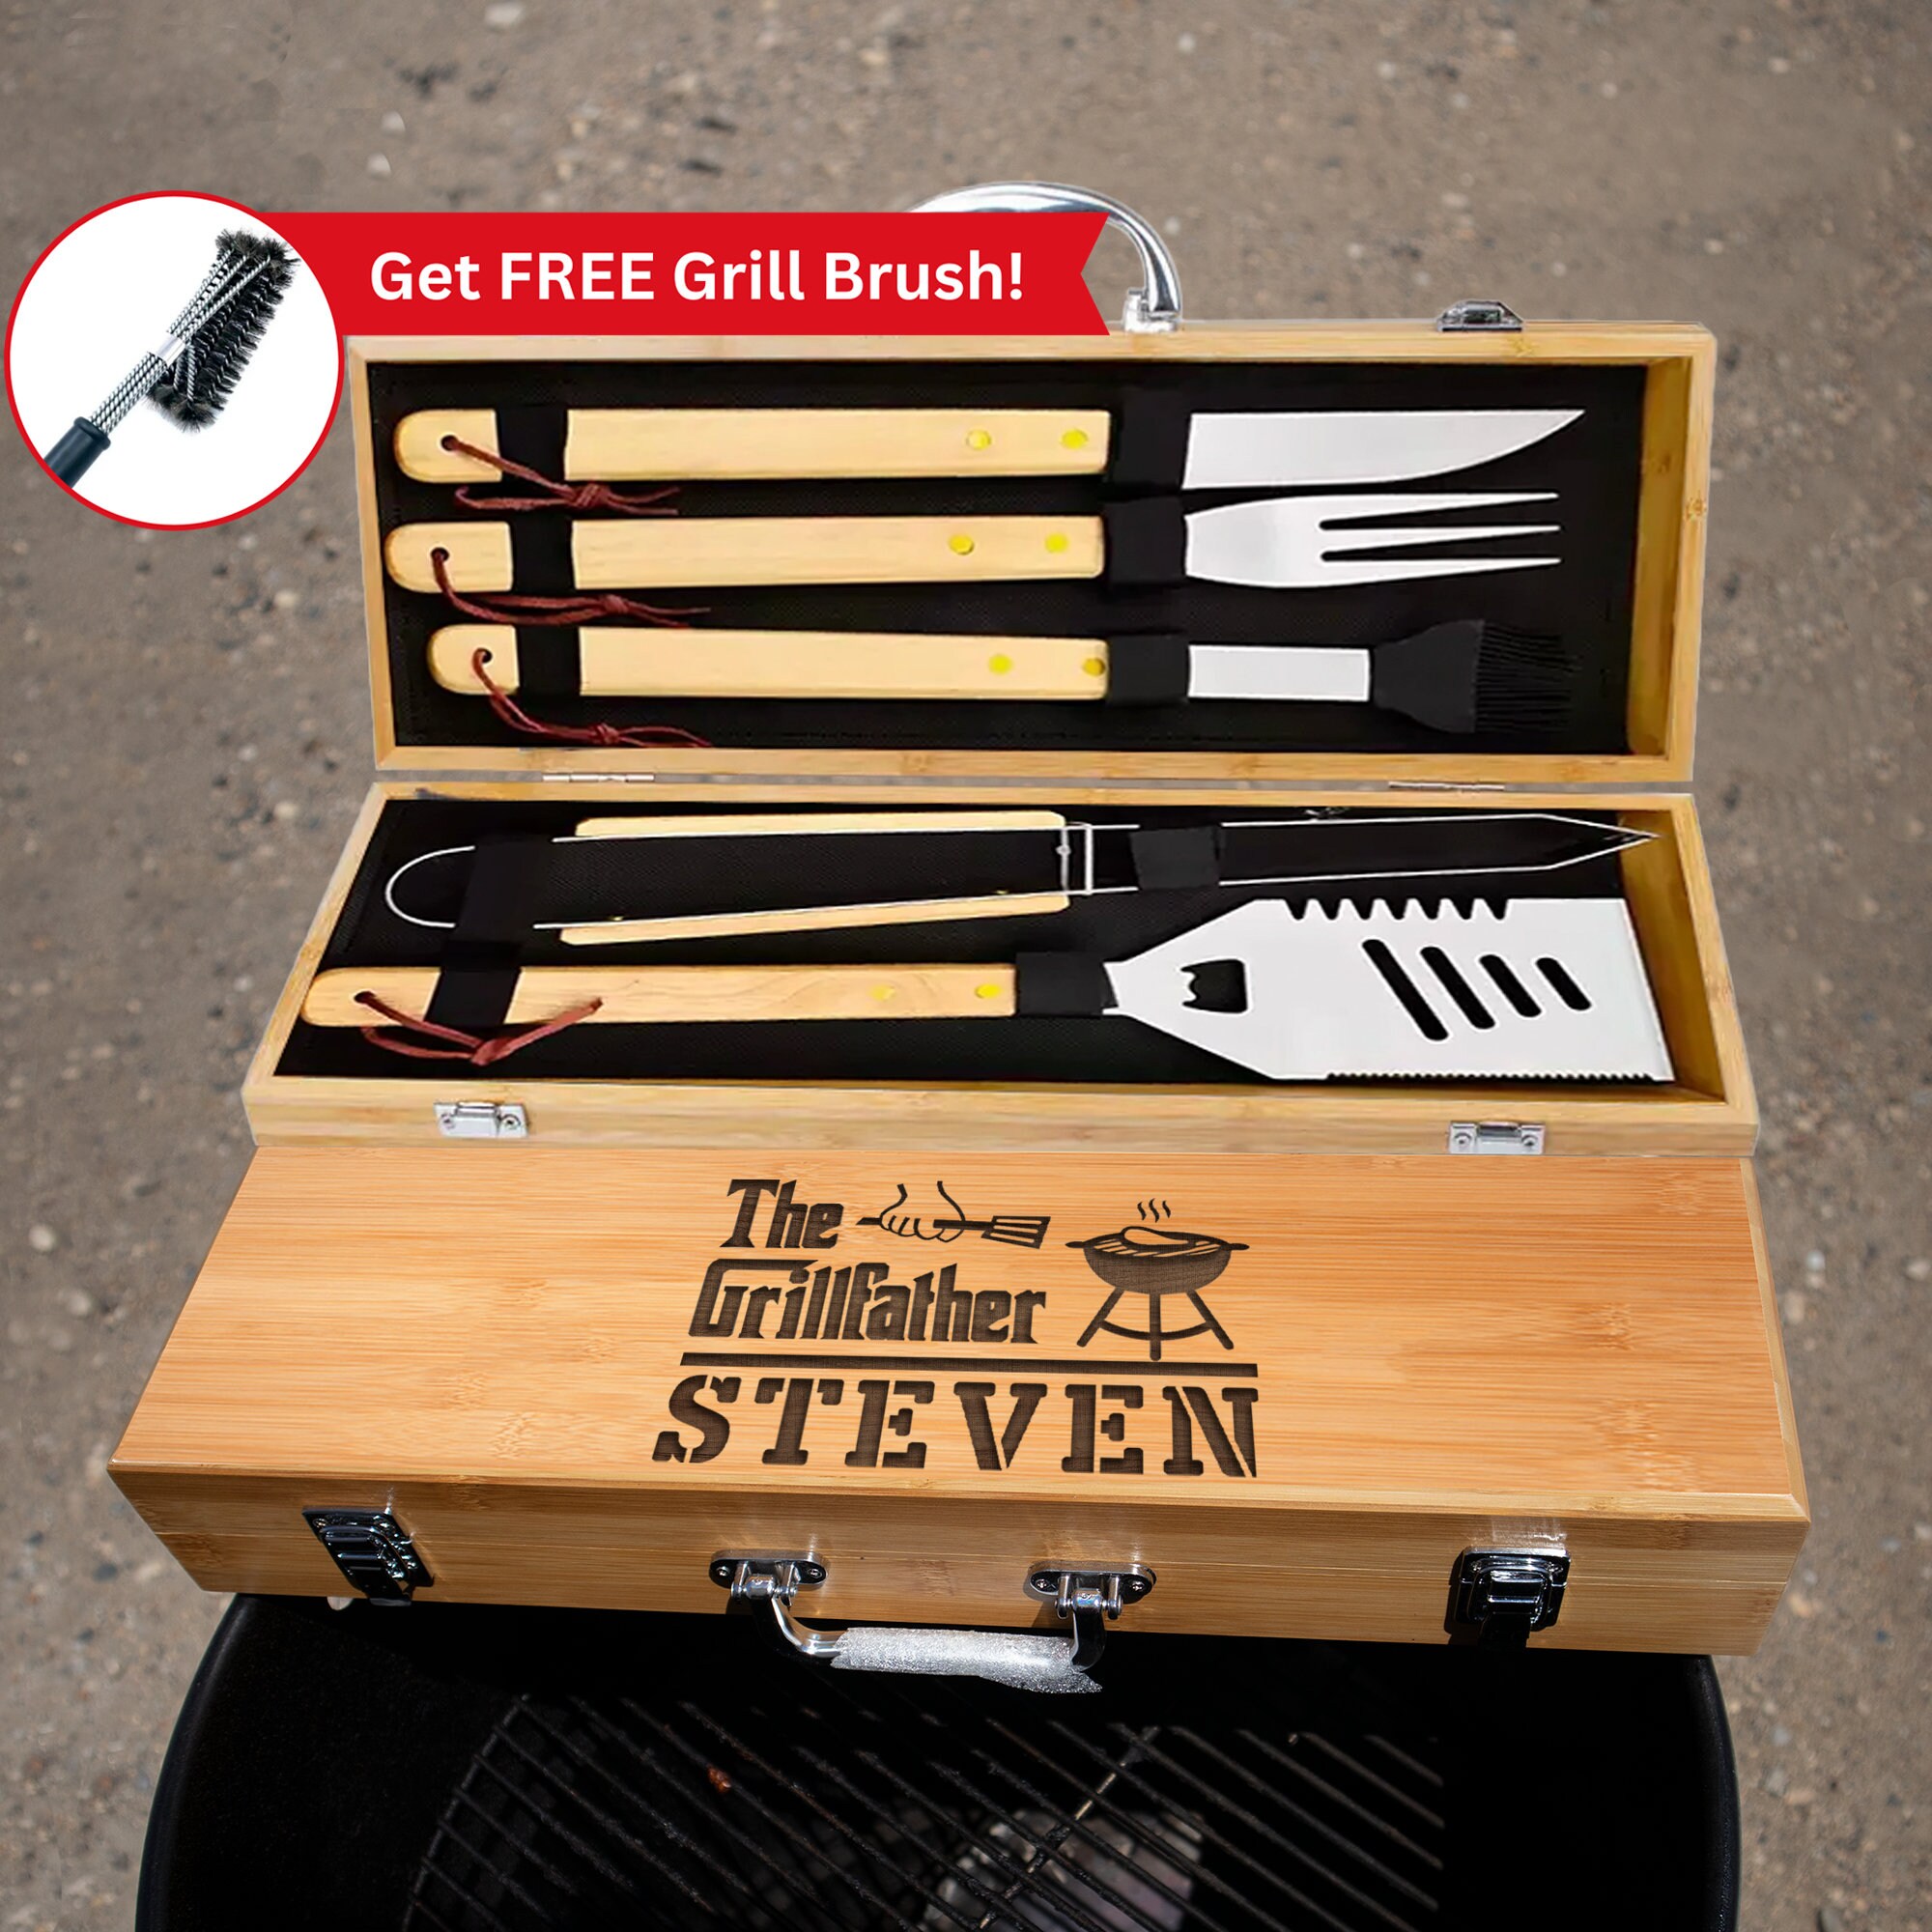 STEVEN-BULL S Grill Spatula for Outdoor Grill, 7-in-1 BBQ Tools Utensils, Extra Long Grill Accessories, Box Package, BBQ Gifts for Men